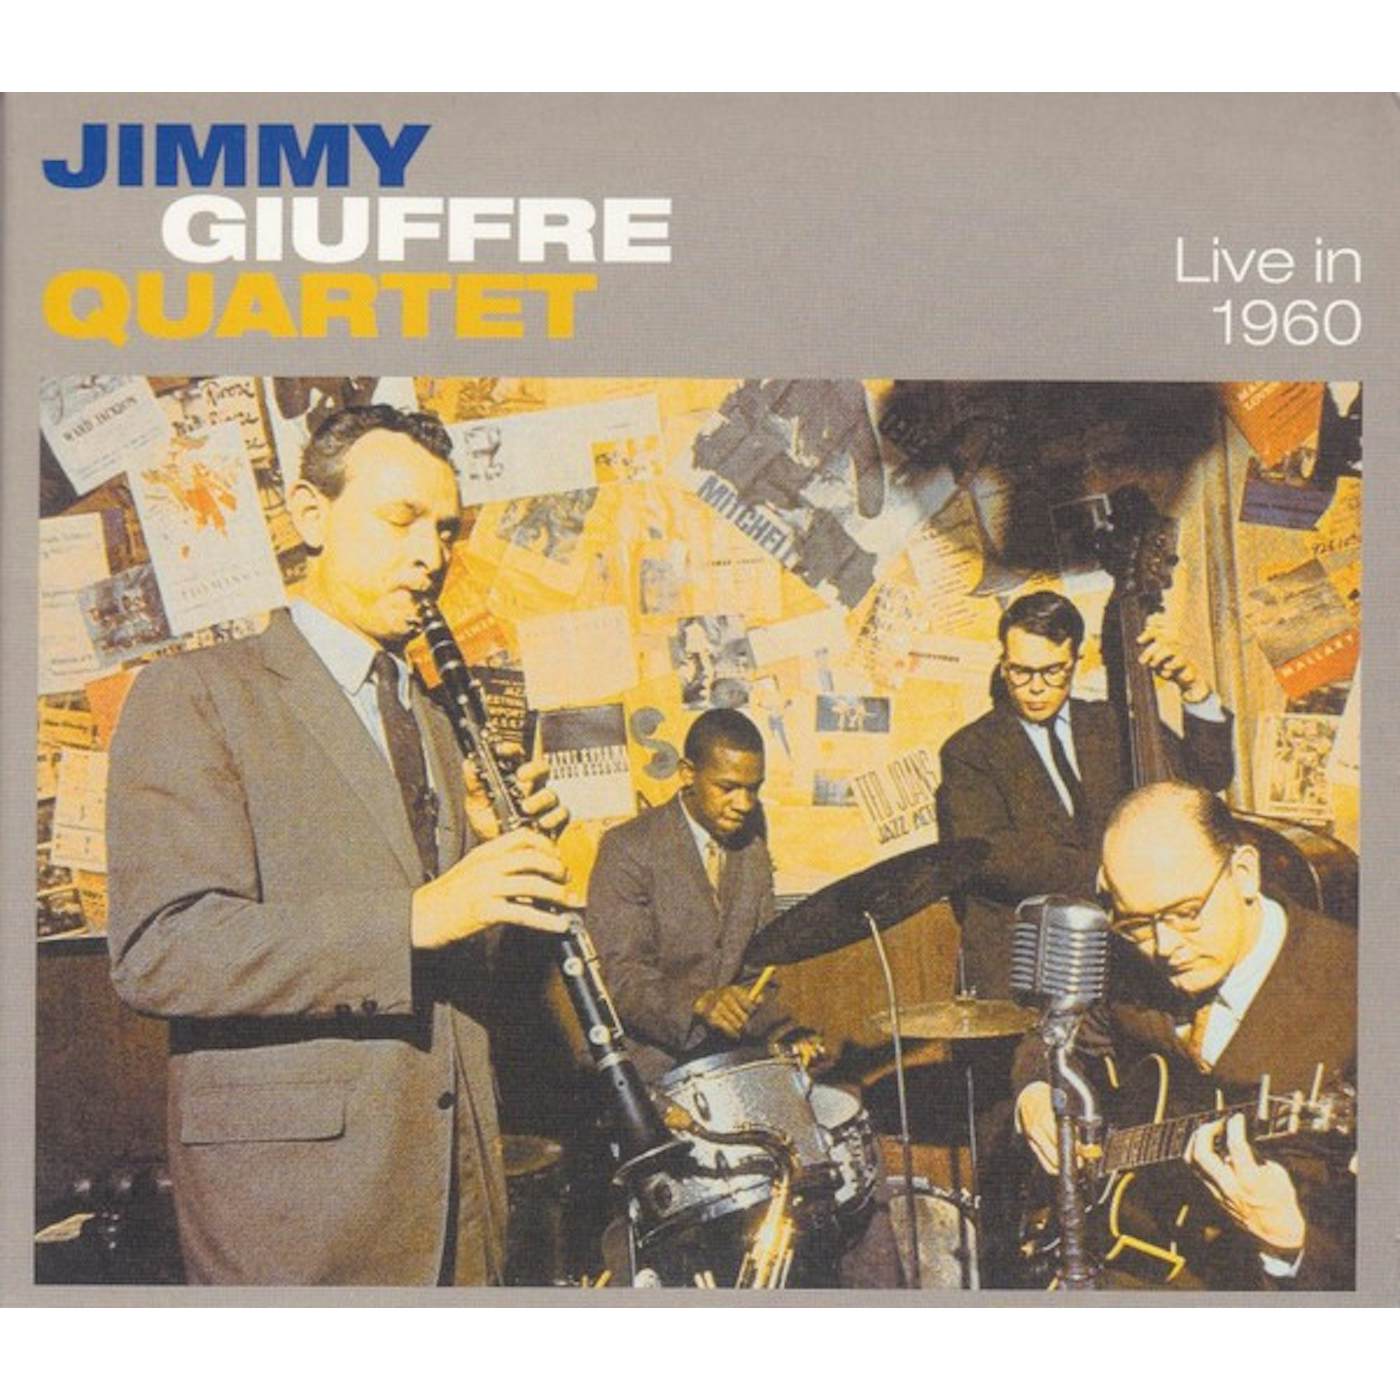 Jimmy Giuffre Live in 1960 CD